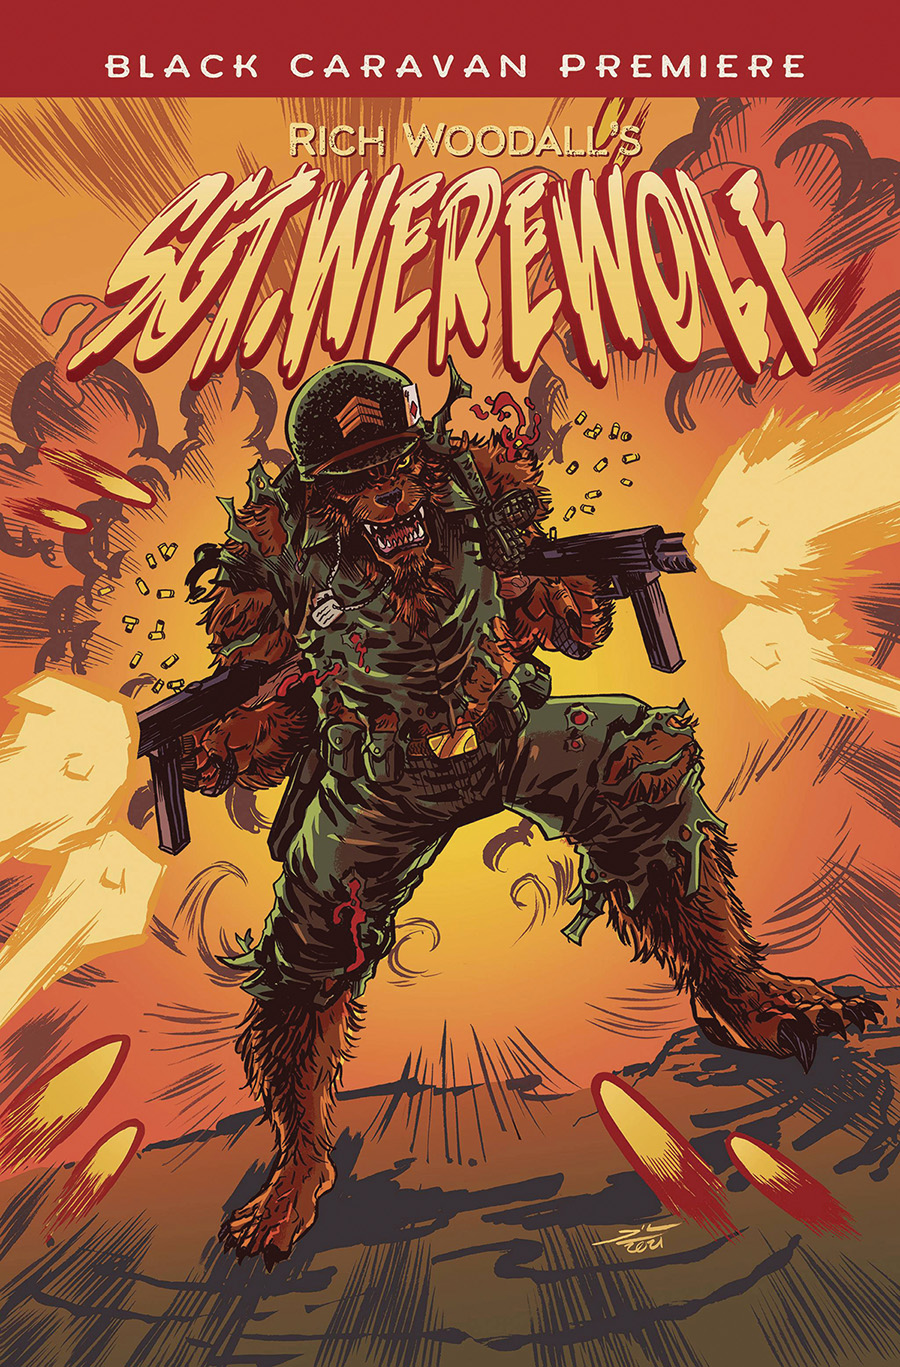 Sgt Werewolf #1 Cover D DF Signed By Rich Woodall